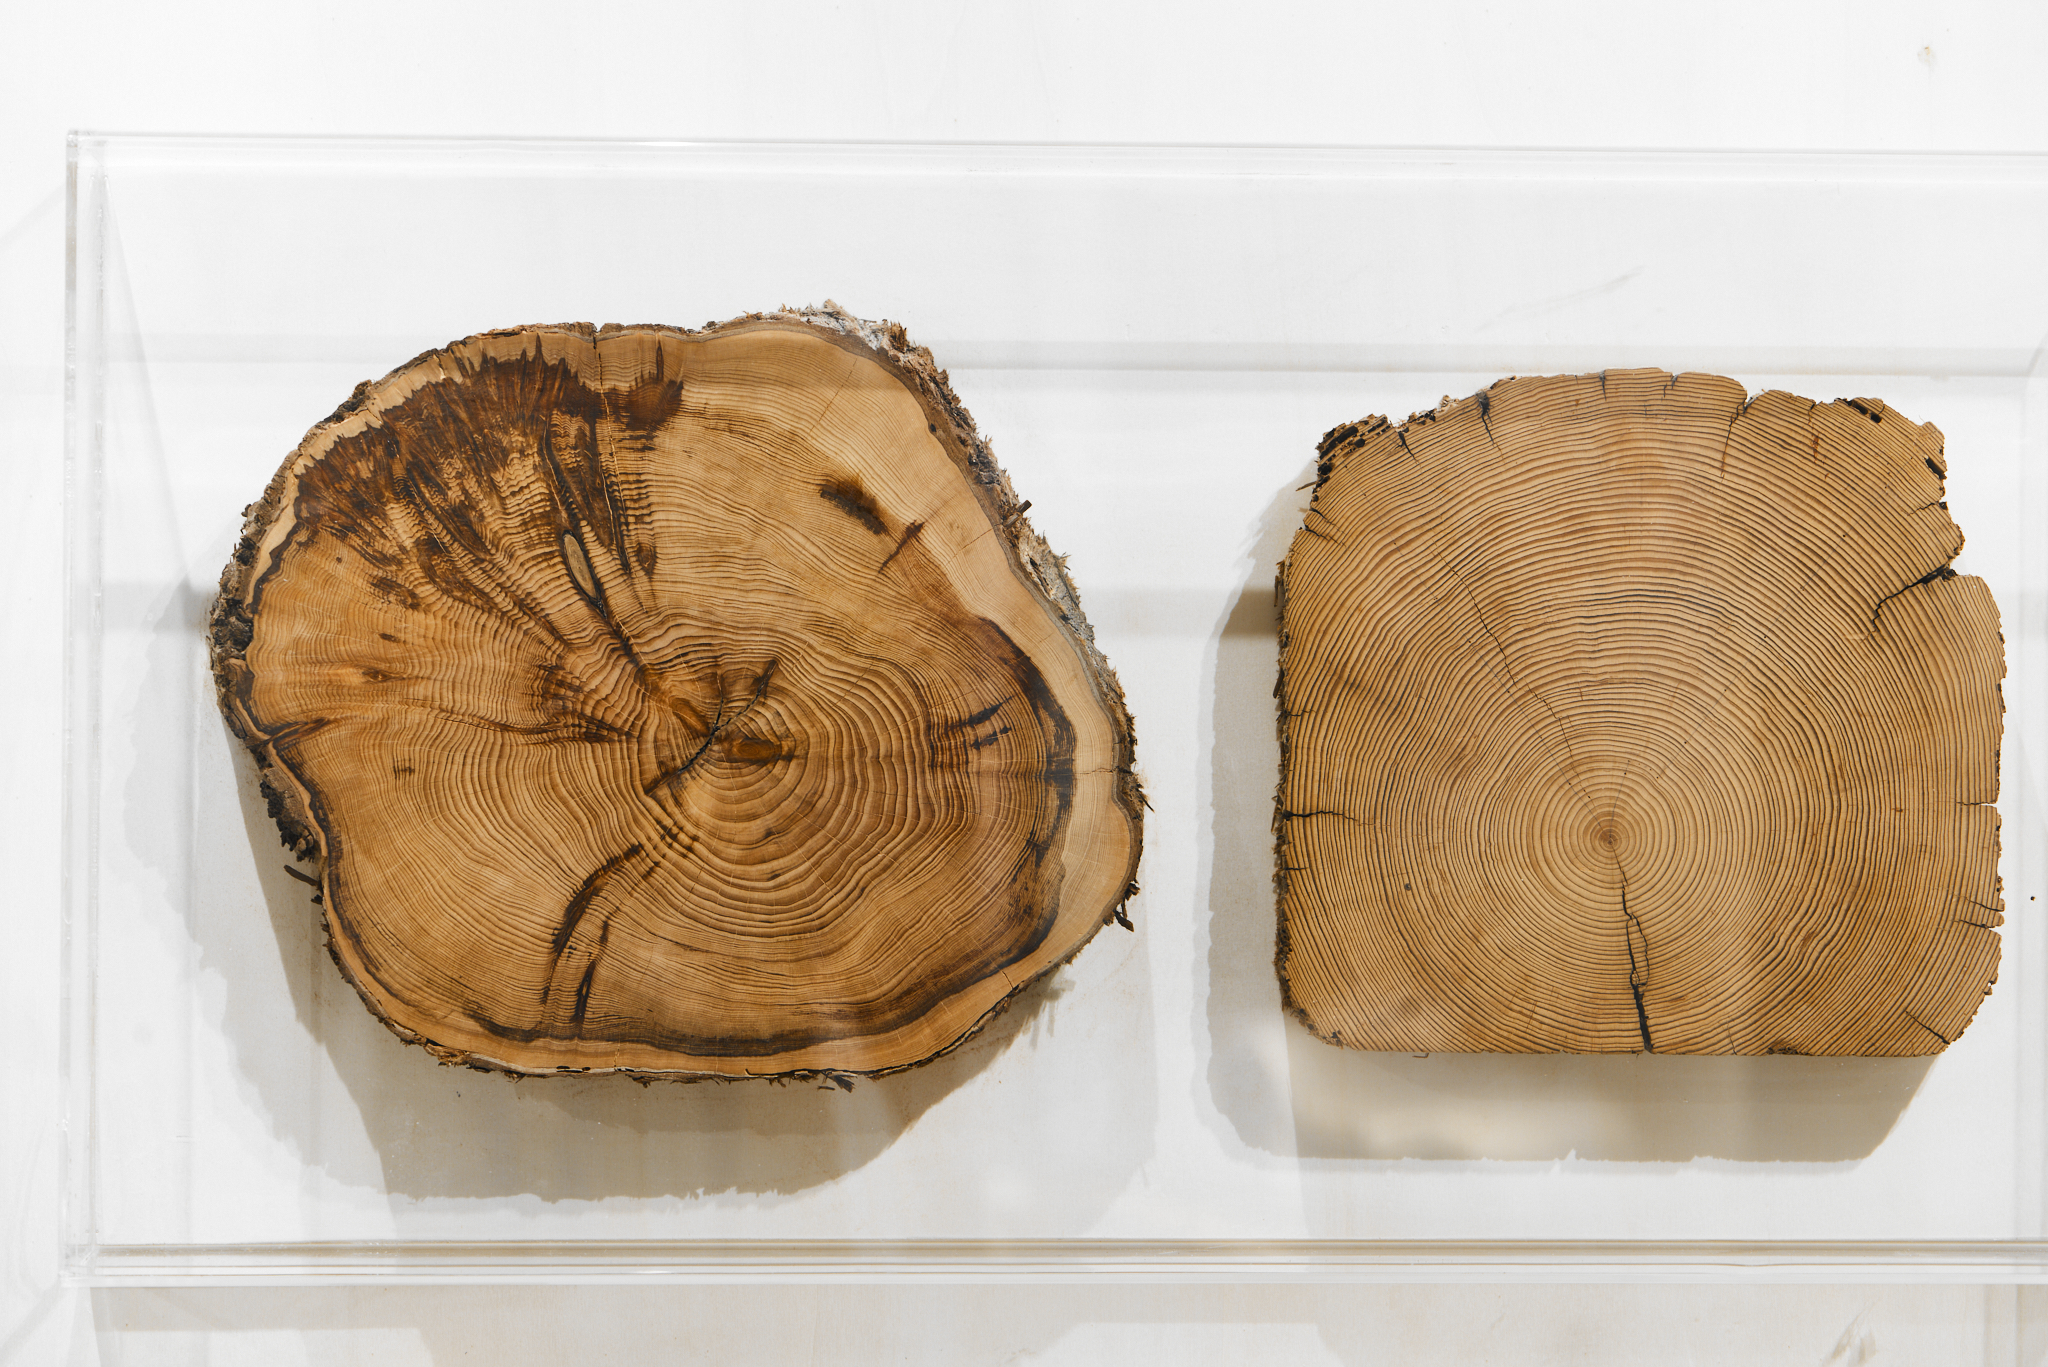 Cross-sections of tree trunks. The layers represent decades of growth